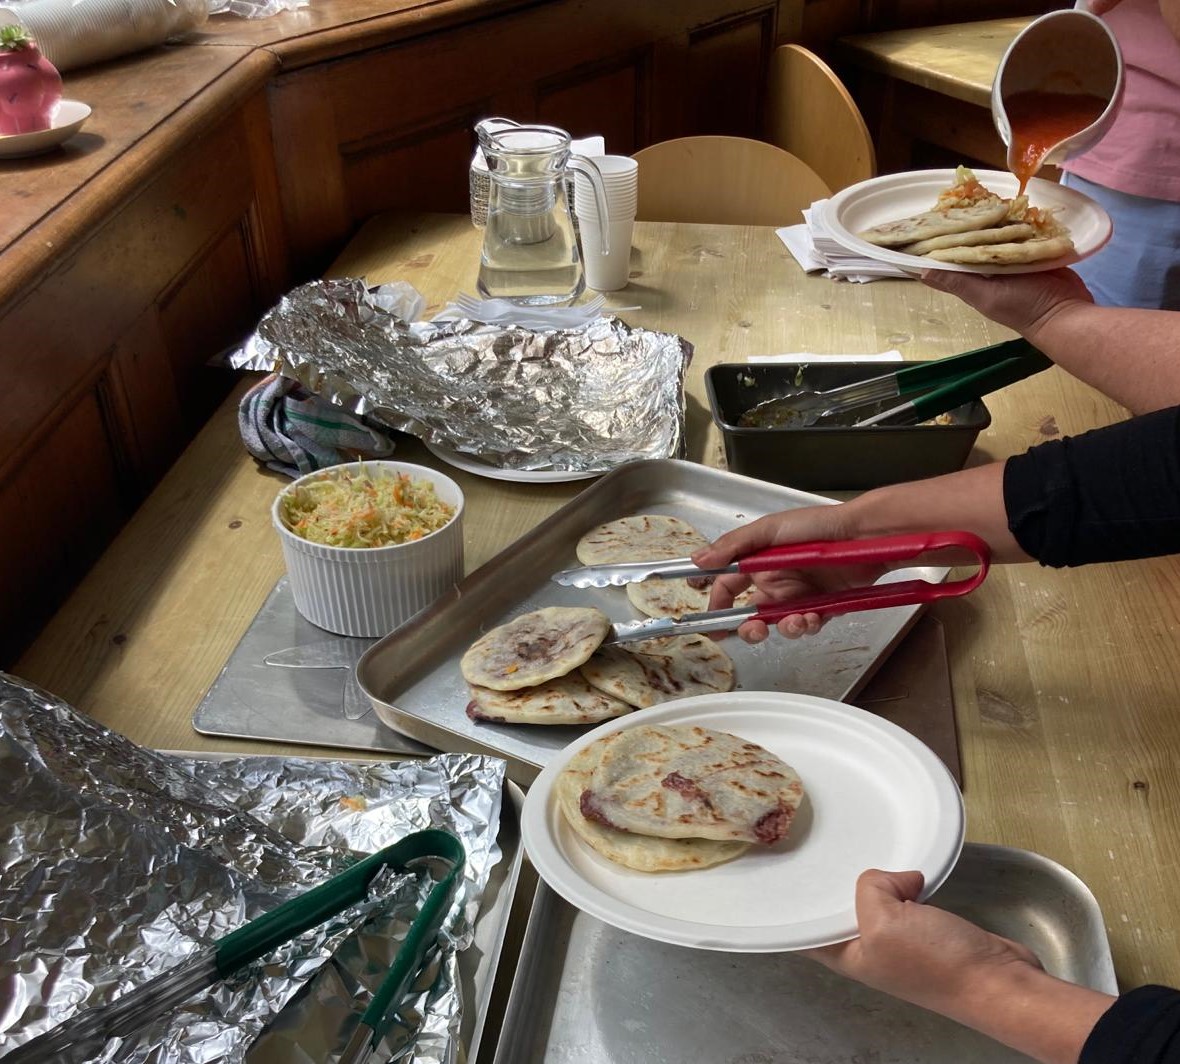 Traditional Latin American food 'Pupusa' is being served on plates. 